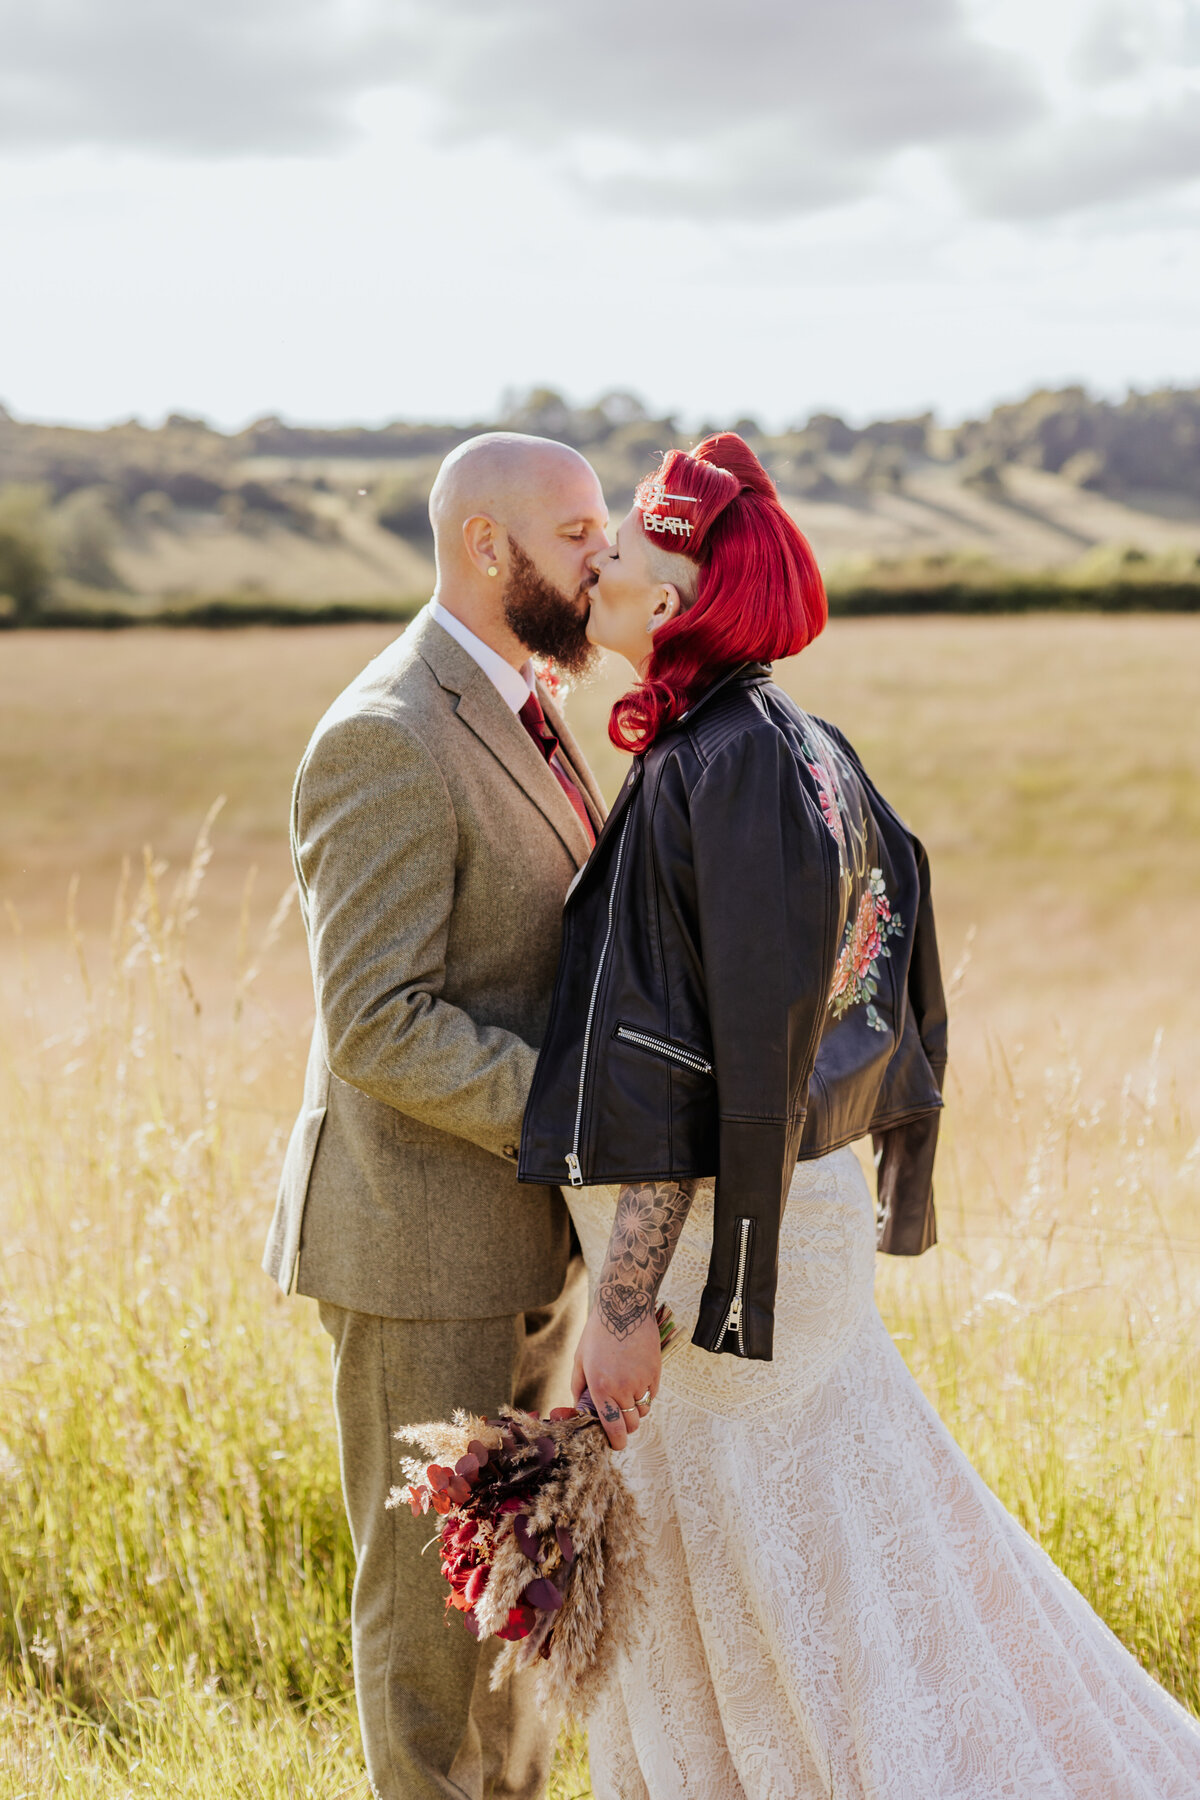 Groom and pin-up style bride kiss during golden hour infront of rolling fields